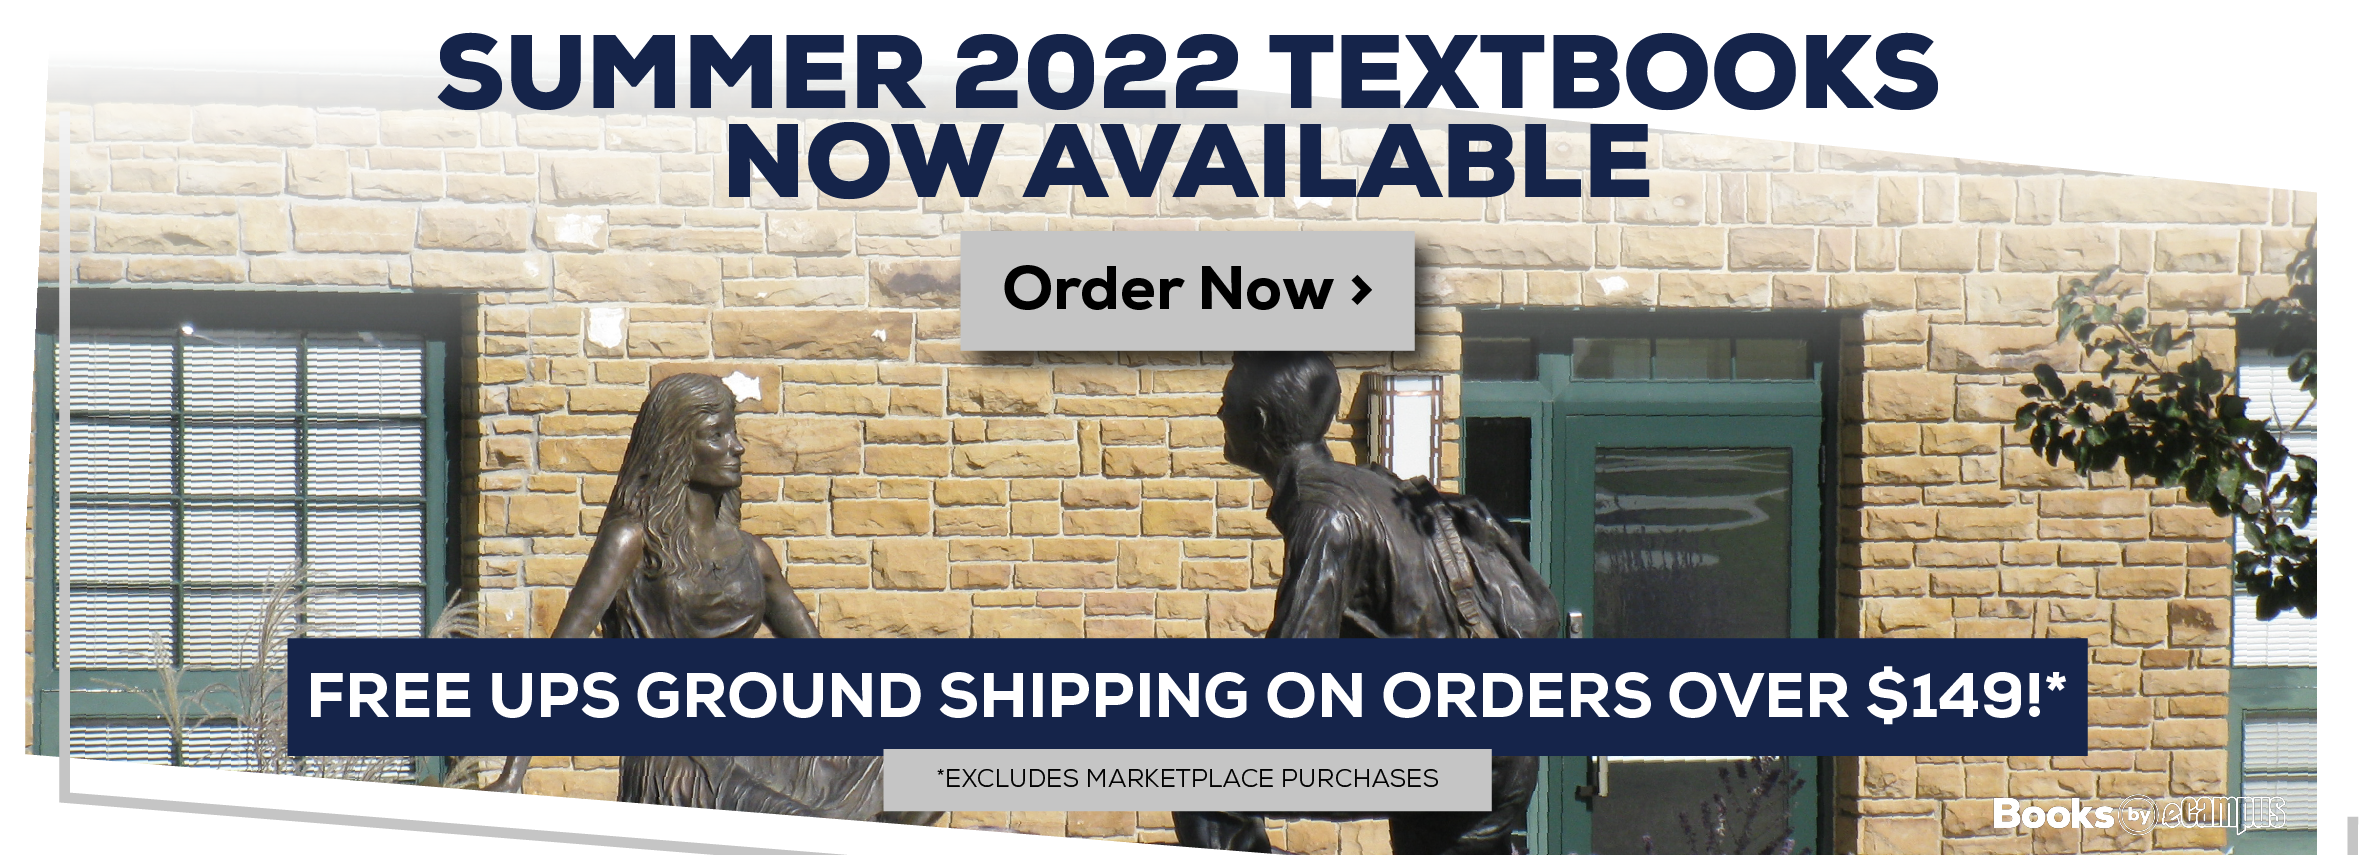 Summer 2022 Textbooks now available. Order now free ups ground shipping on orders over $149!